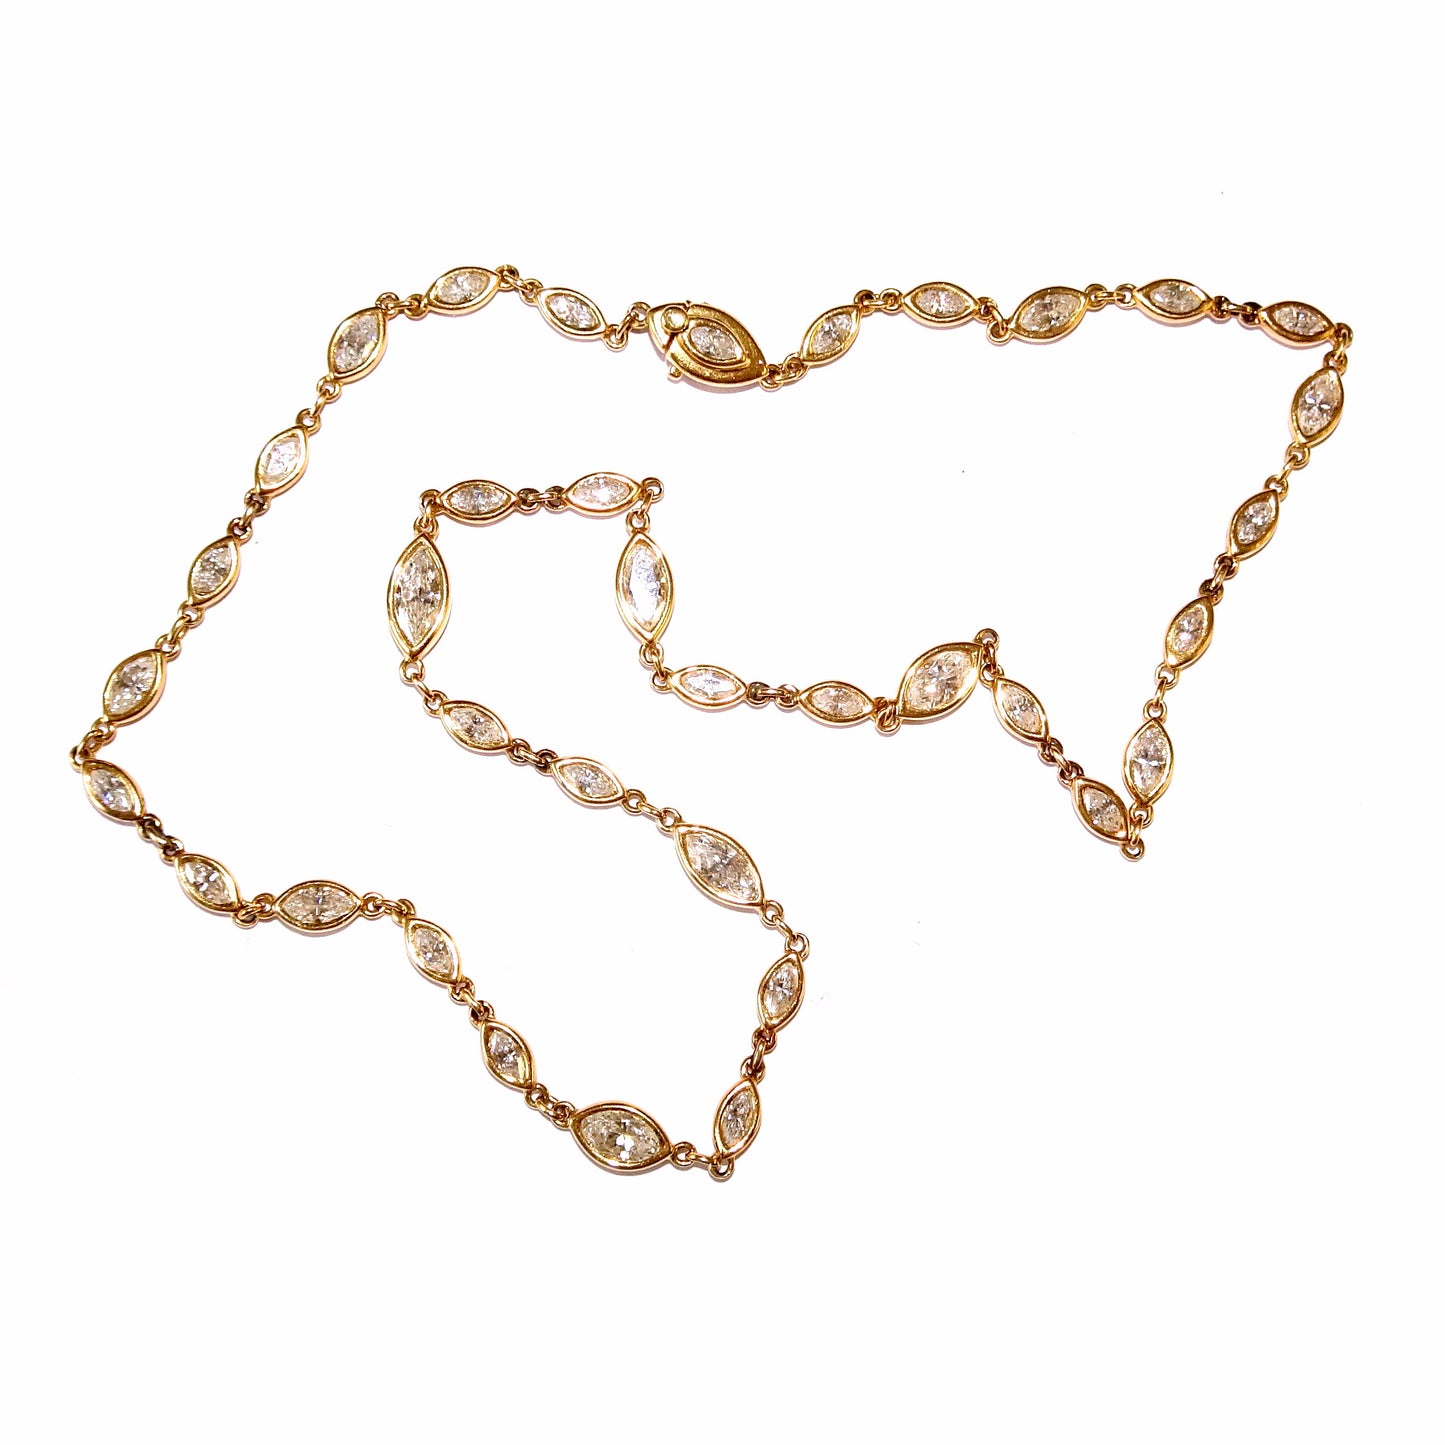 Post-1980s 18KT Yellow Gold Marquise Diamond Necklace front